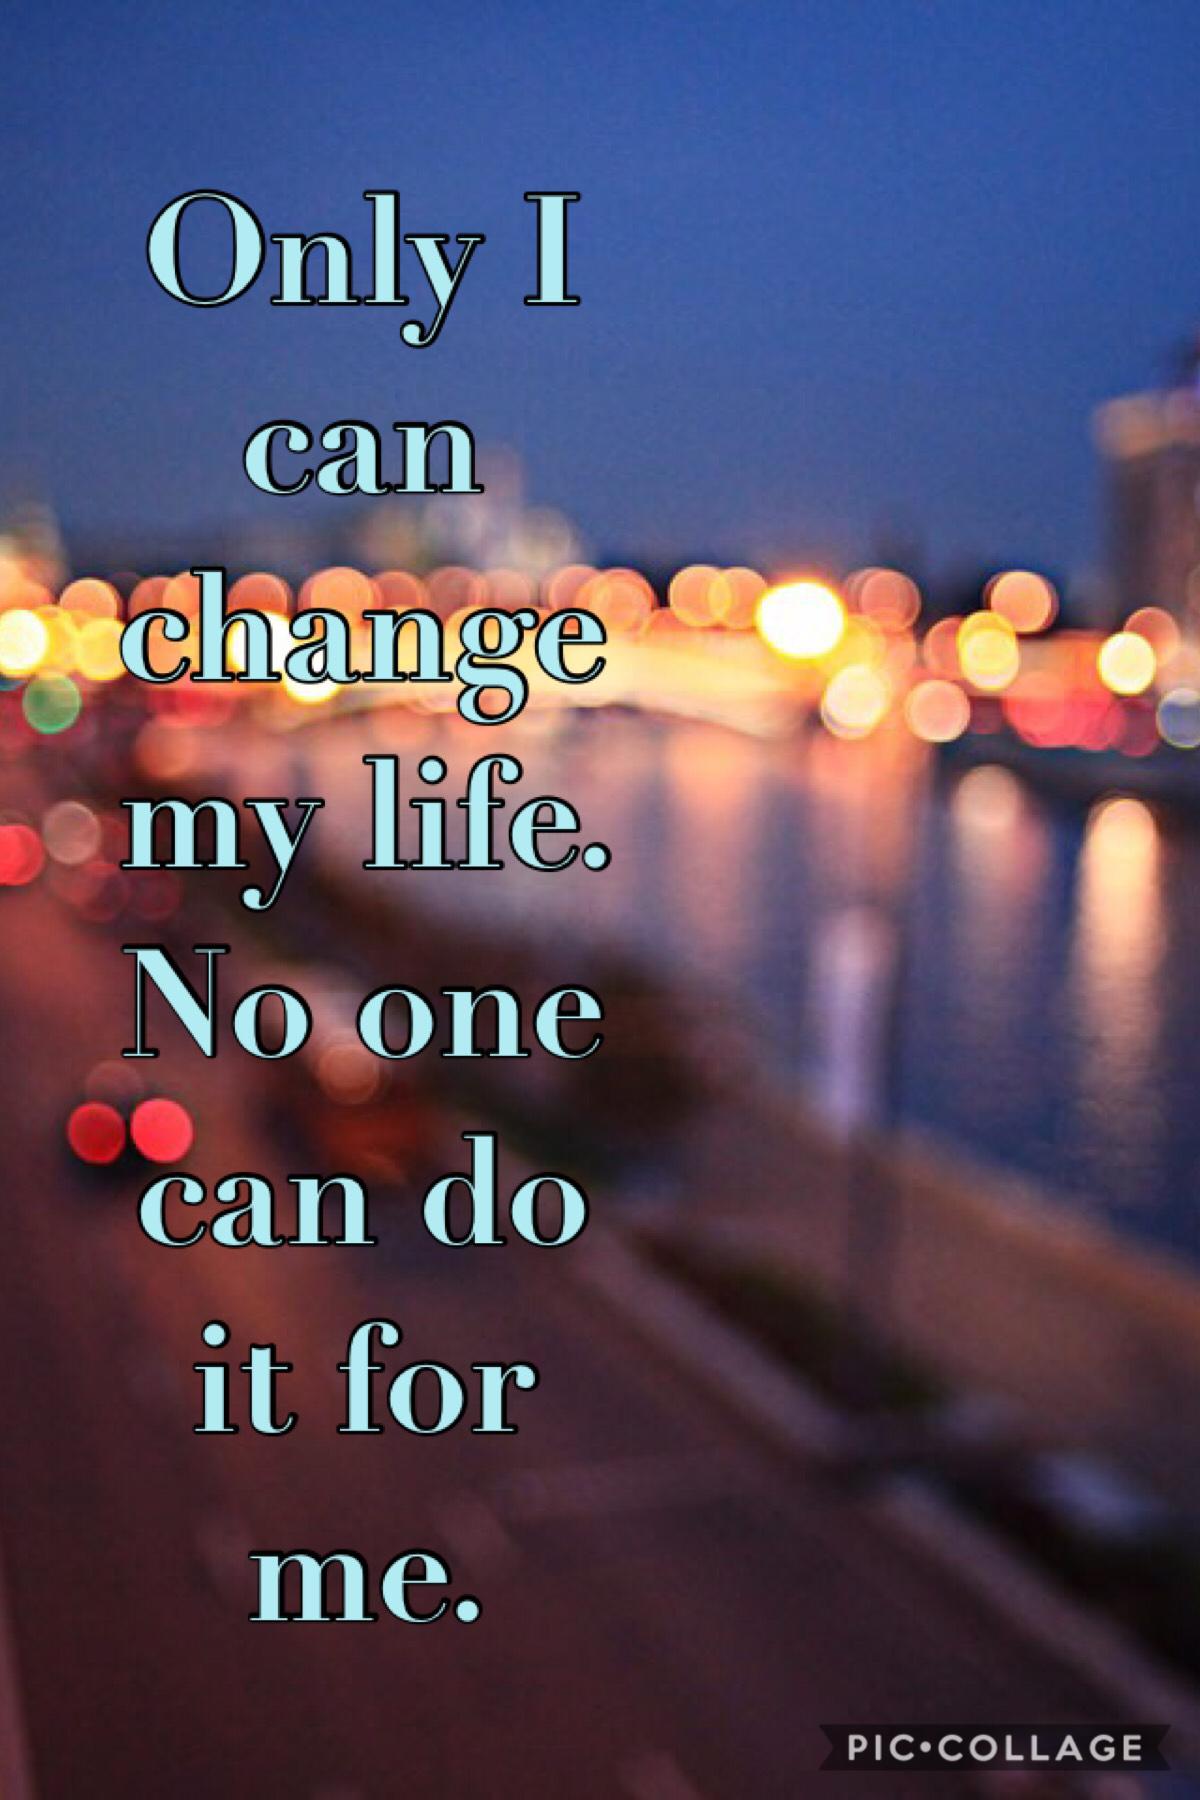 Only I can change my life. No one can do it for me. 